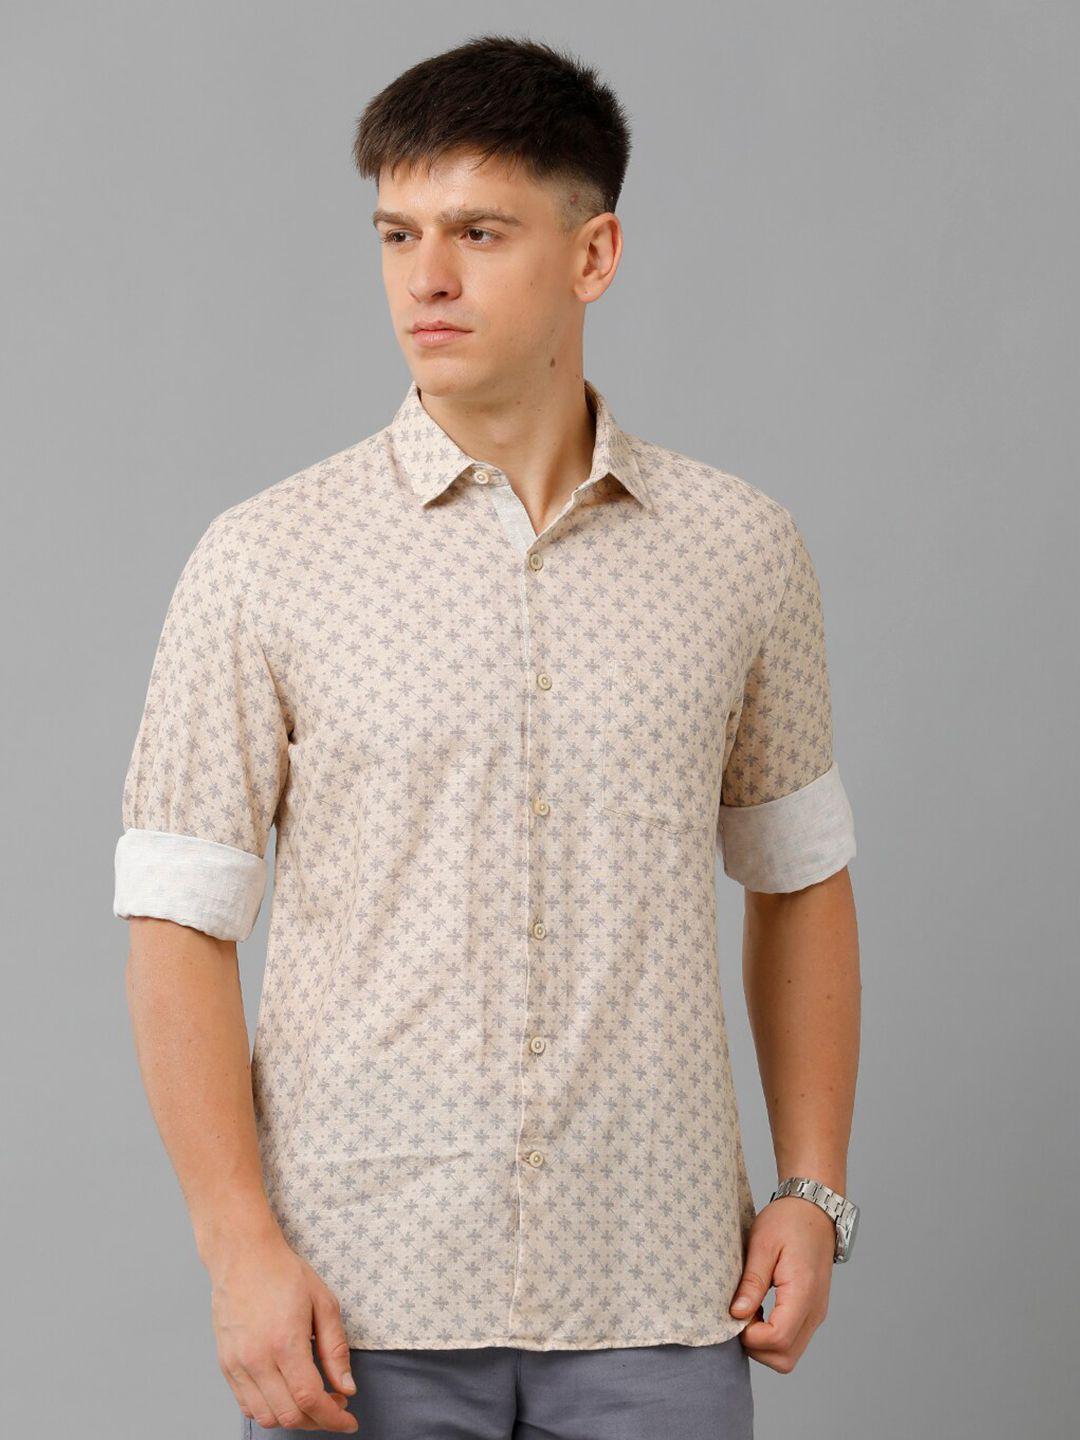 linen club floral printed opaque casual pure linen shirt